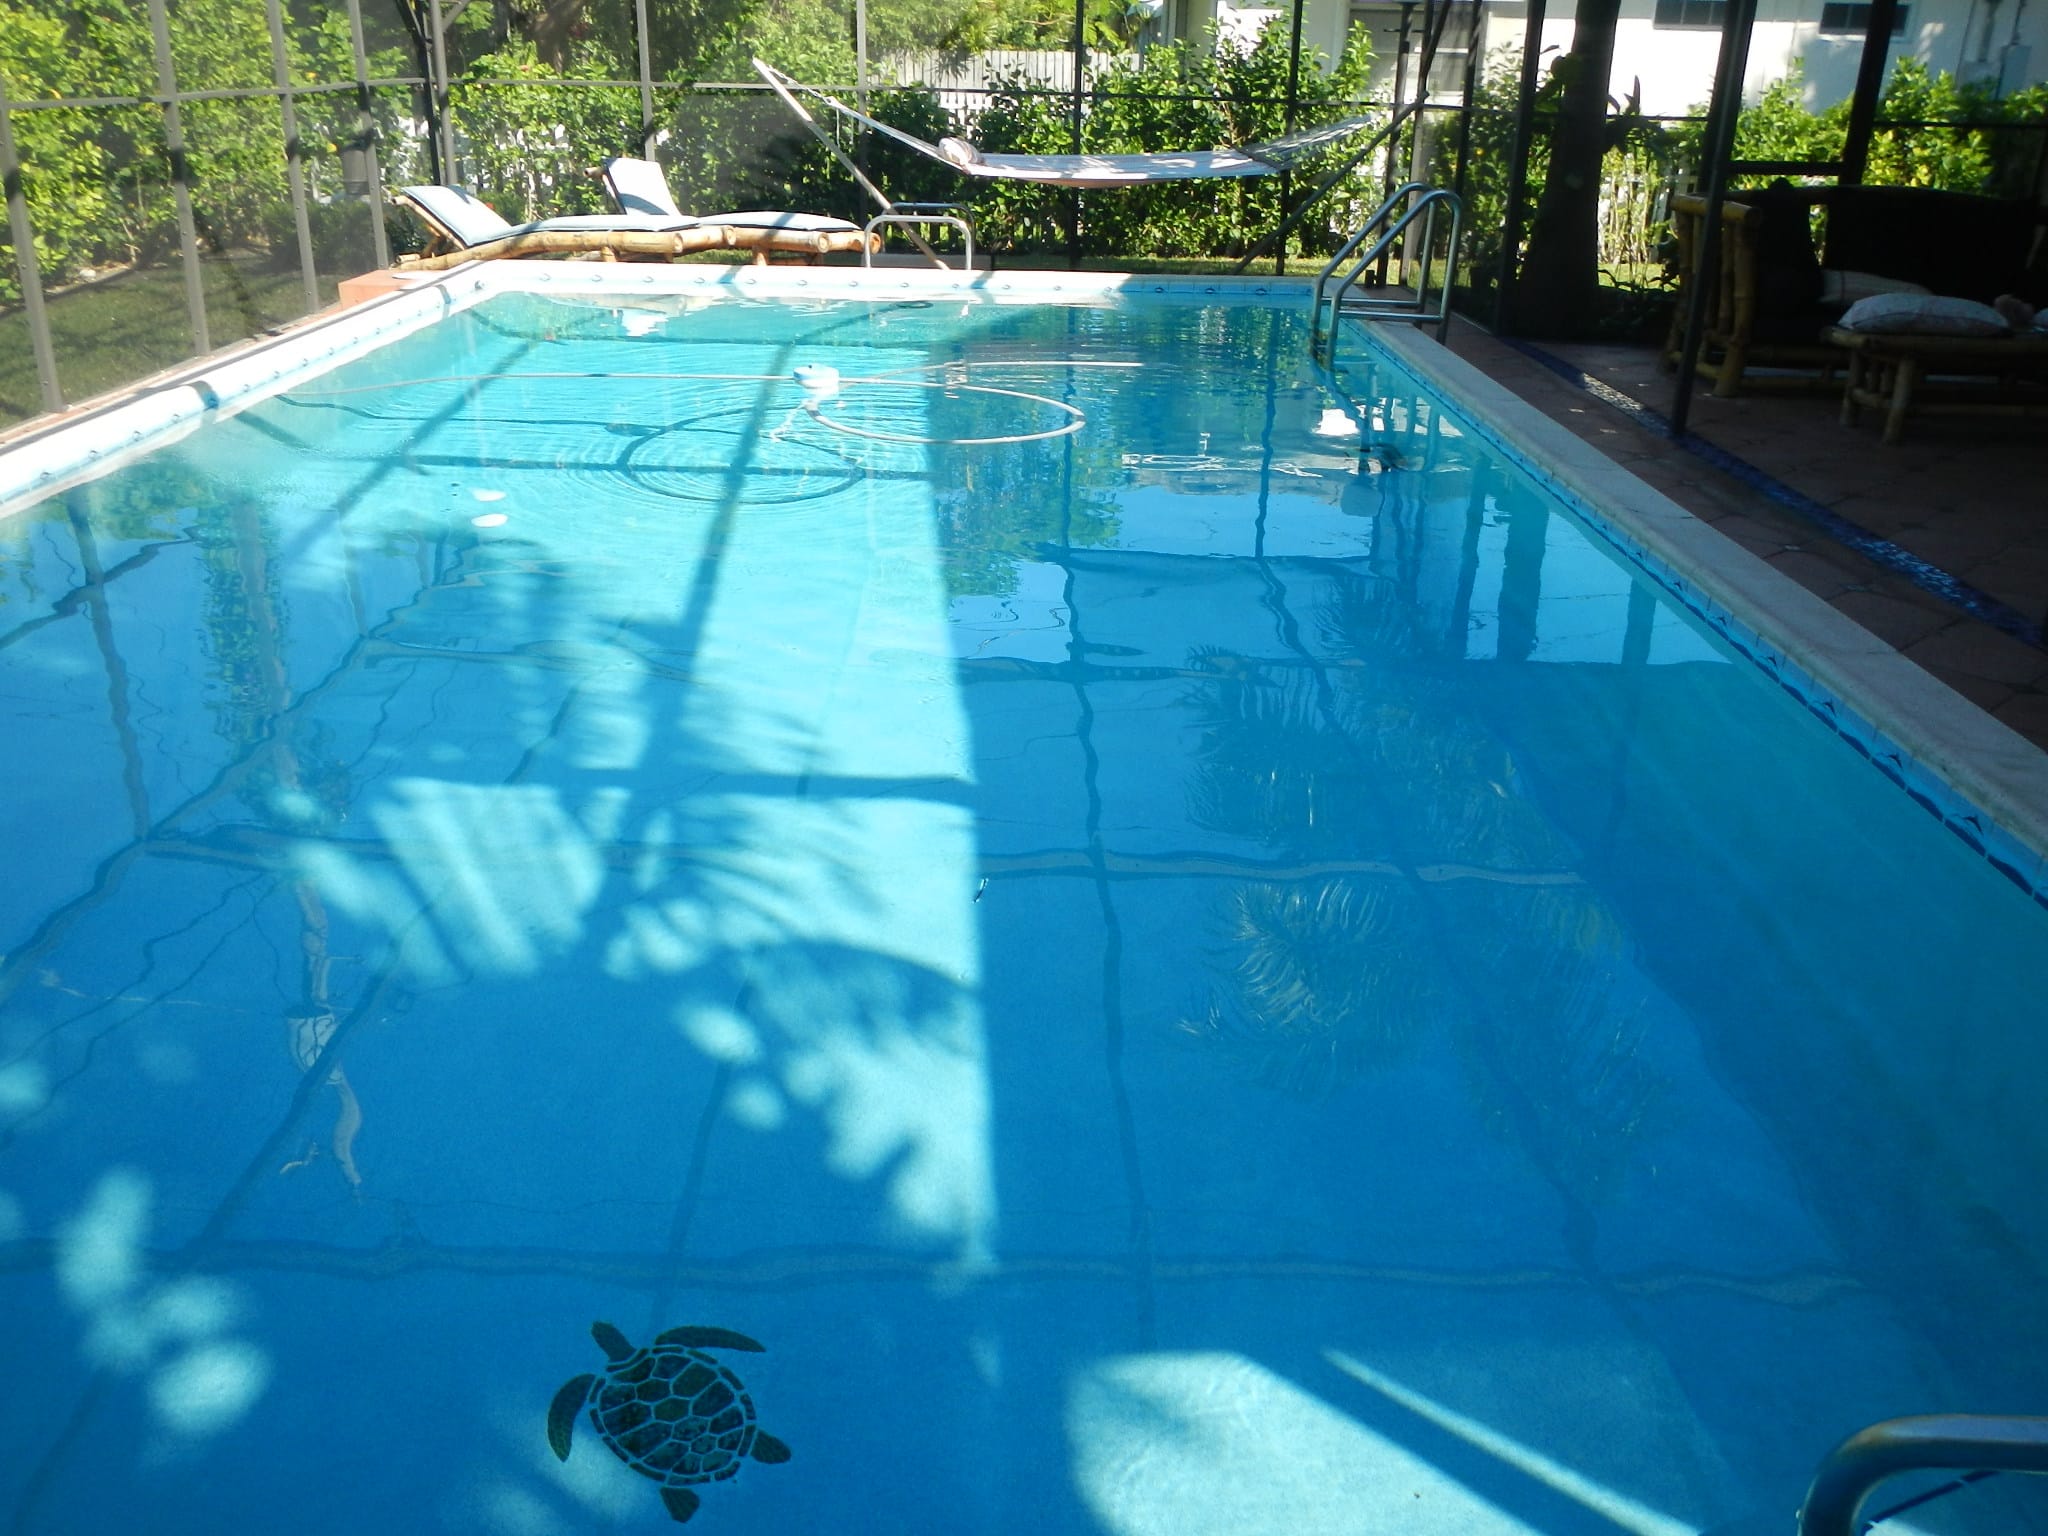 What You Need to Do Before You Buy a Home With a Pool